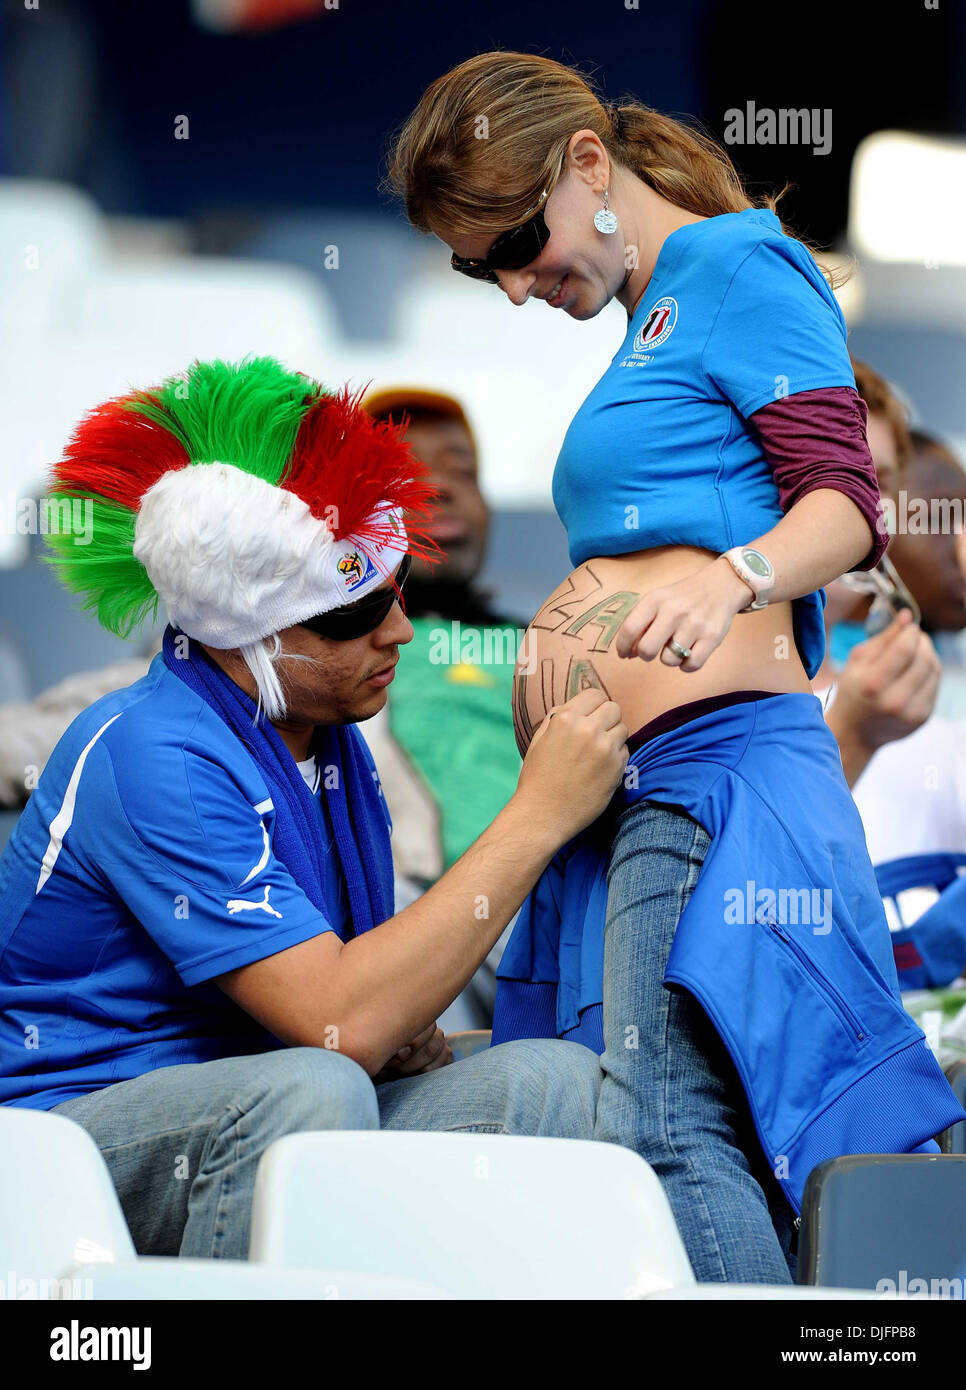 June 20, 2010 - Nelspruit, South Africa - Fans of Italy attend the FIFA World Cup 2010 soccer match between Italy and New Zealand at Mbombela Stadium on June 20, 2010 in Nelspruit, South Africa. (Credit Image: © Luca Ghidoni/ZUMApress.com) Stock Photo